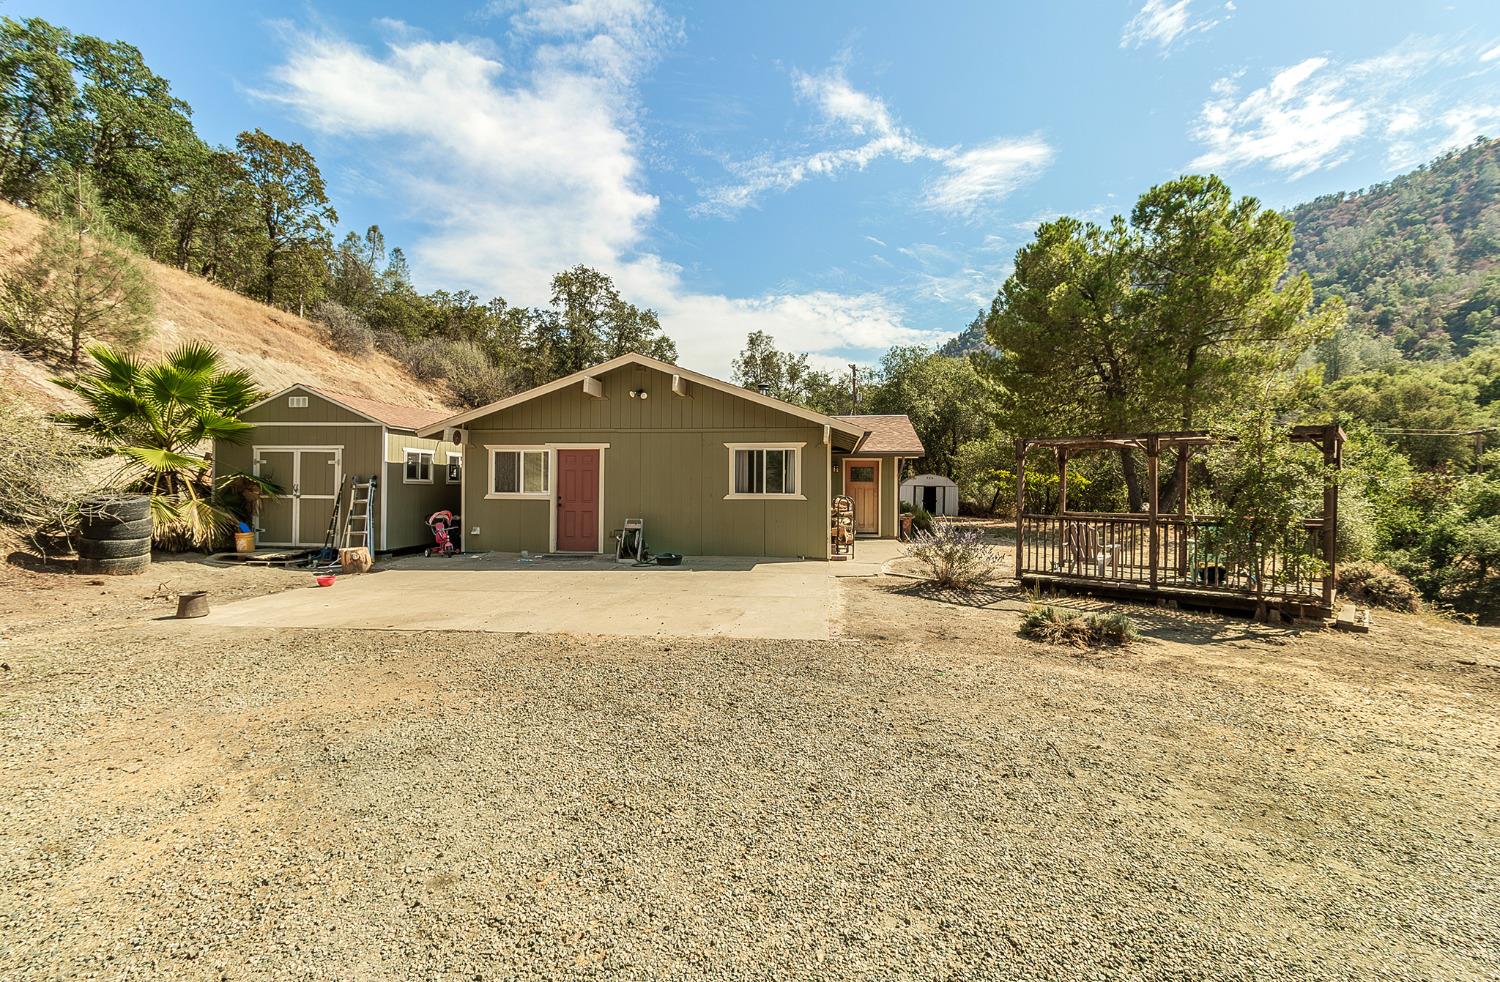 Photo of 32293 Sycamore Rd in Tollhouse, CA